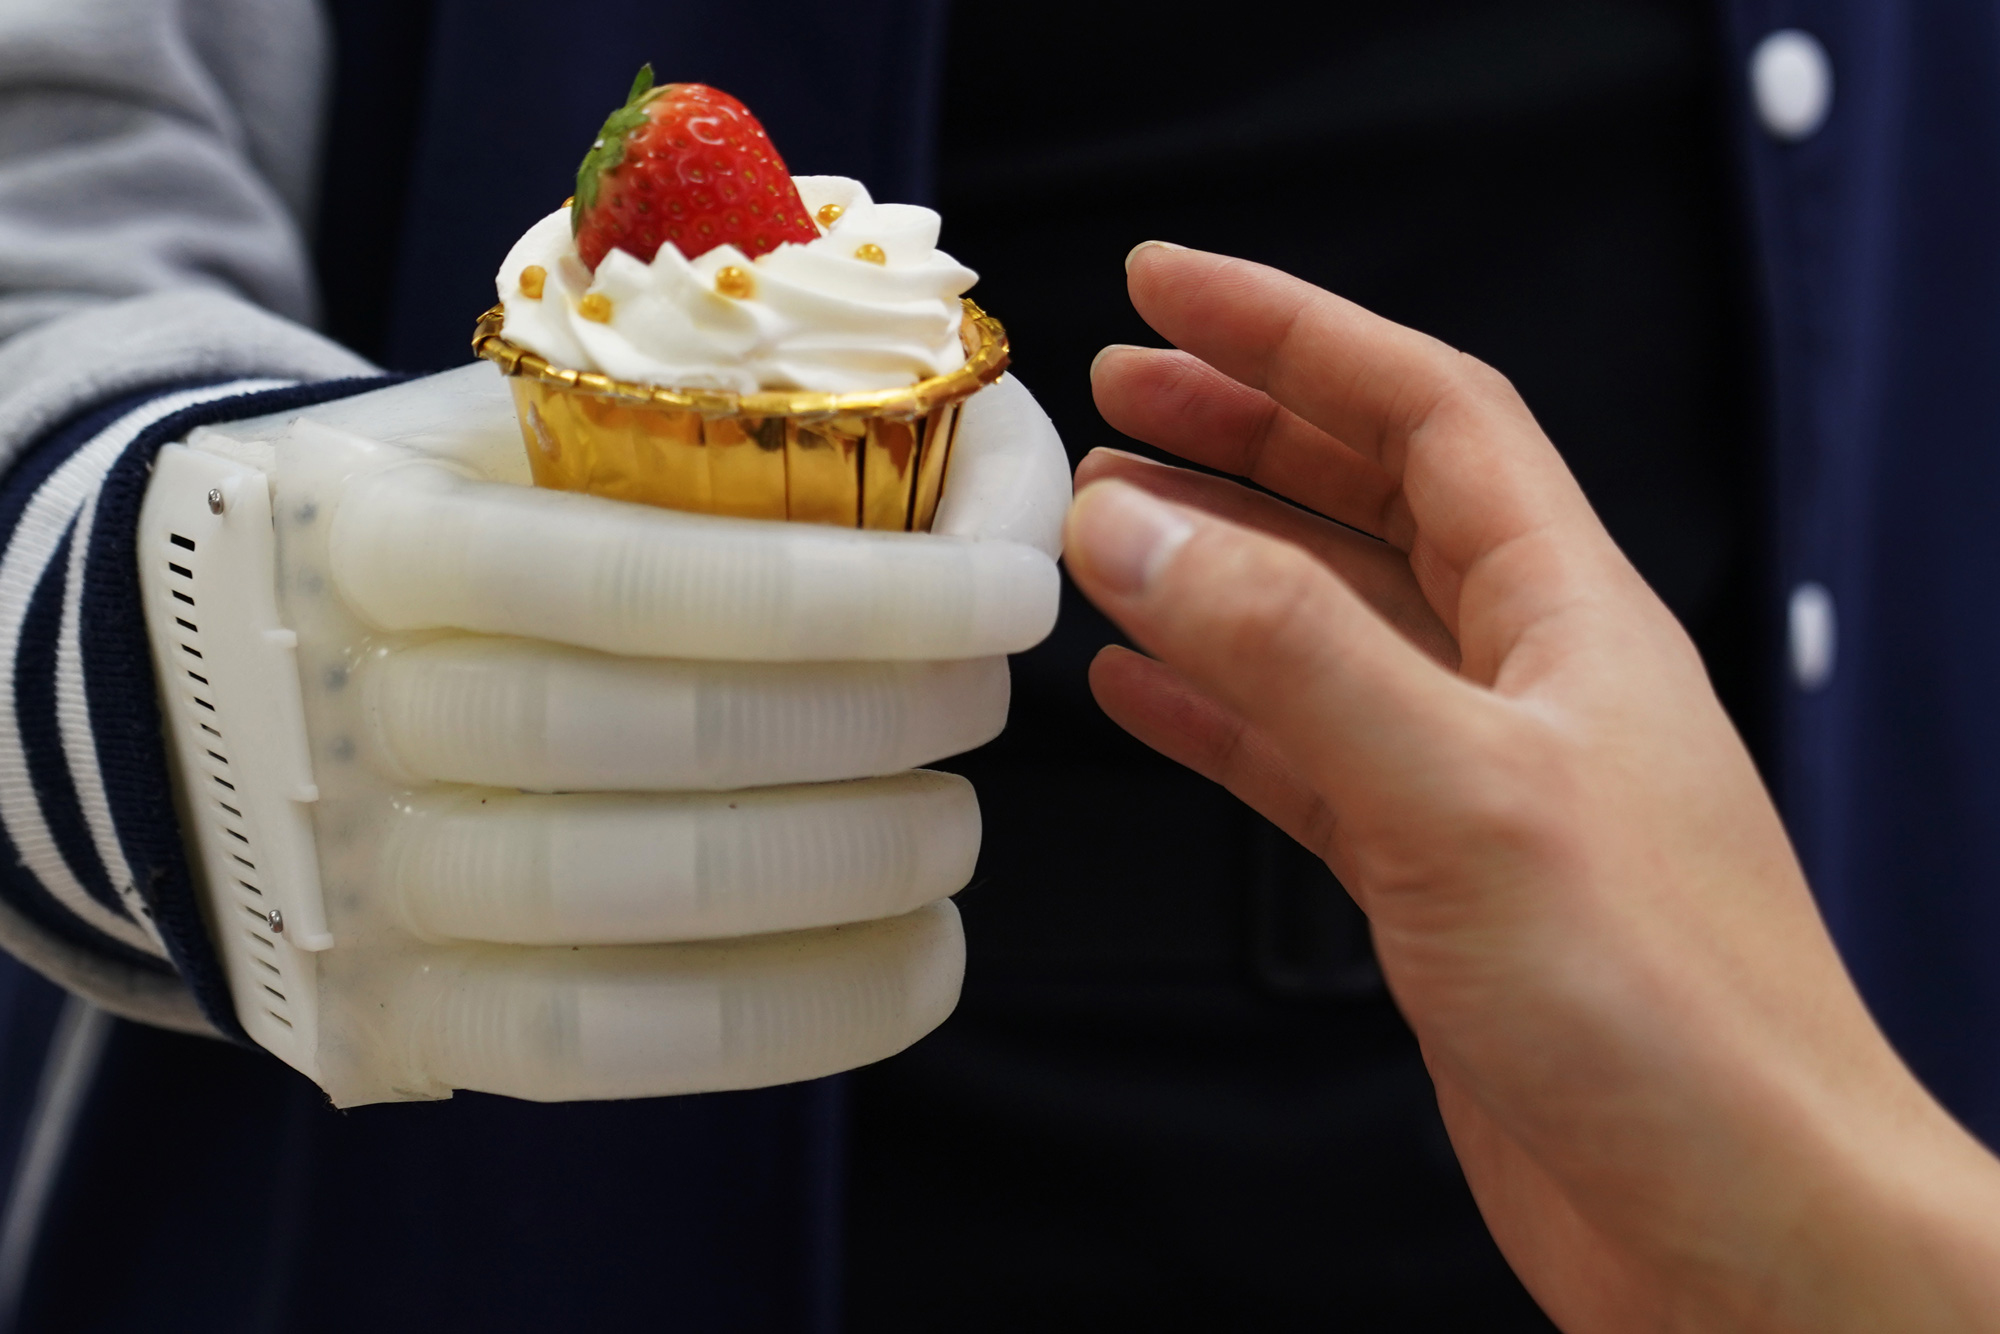 Inflatable robotic hand gives amputees real-time tactile control | MIT News